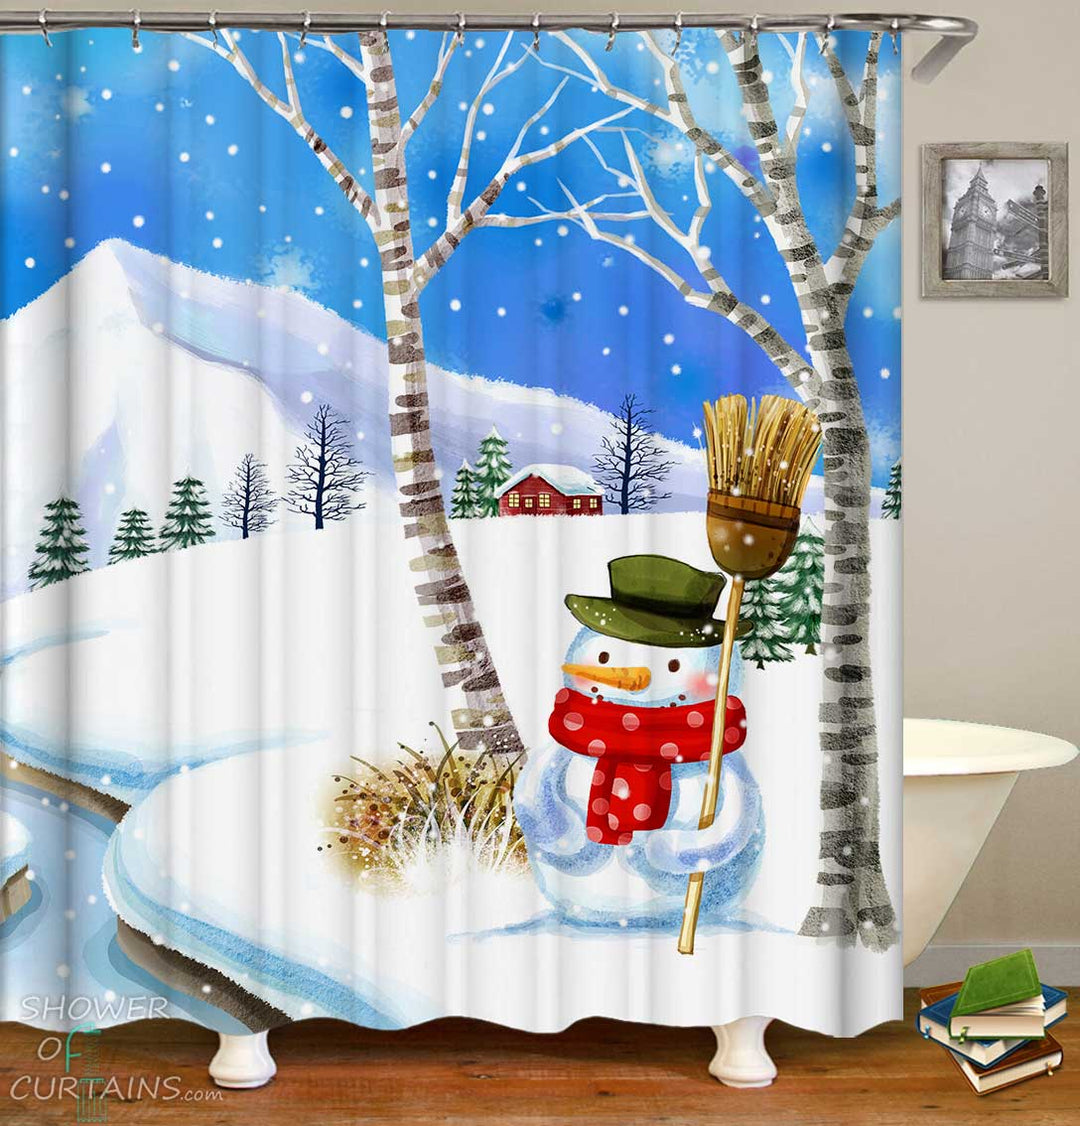 Shower Curtains with Snowy Christmas Snowman